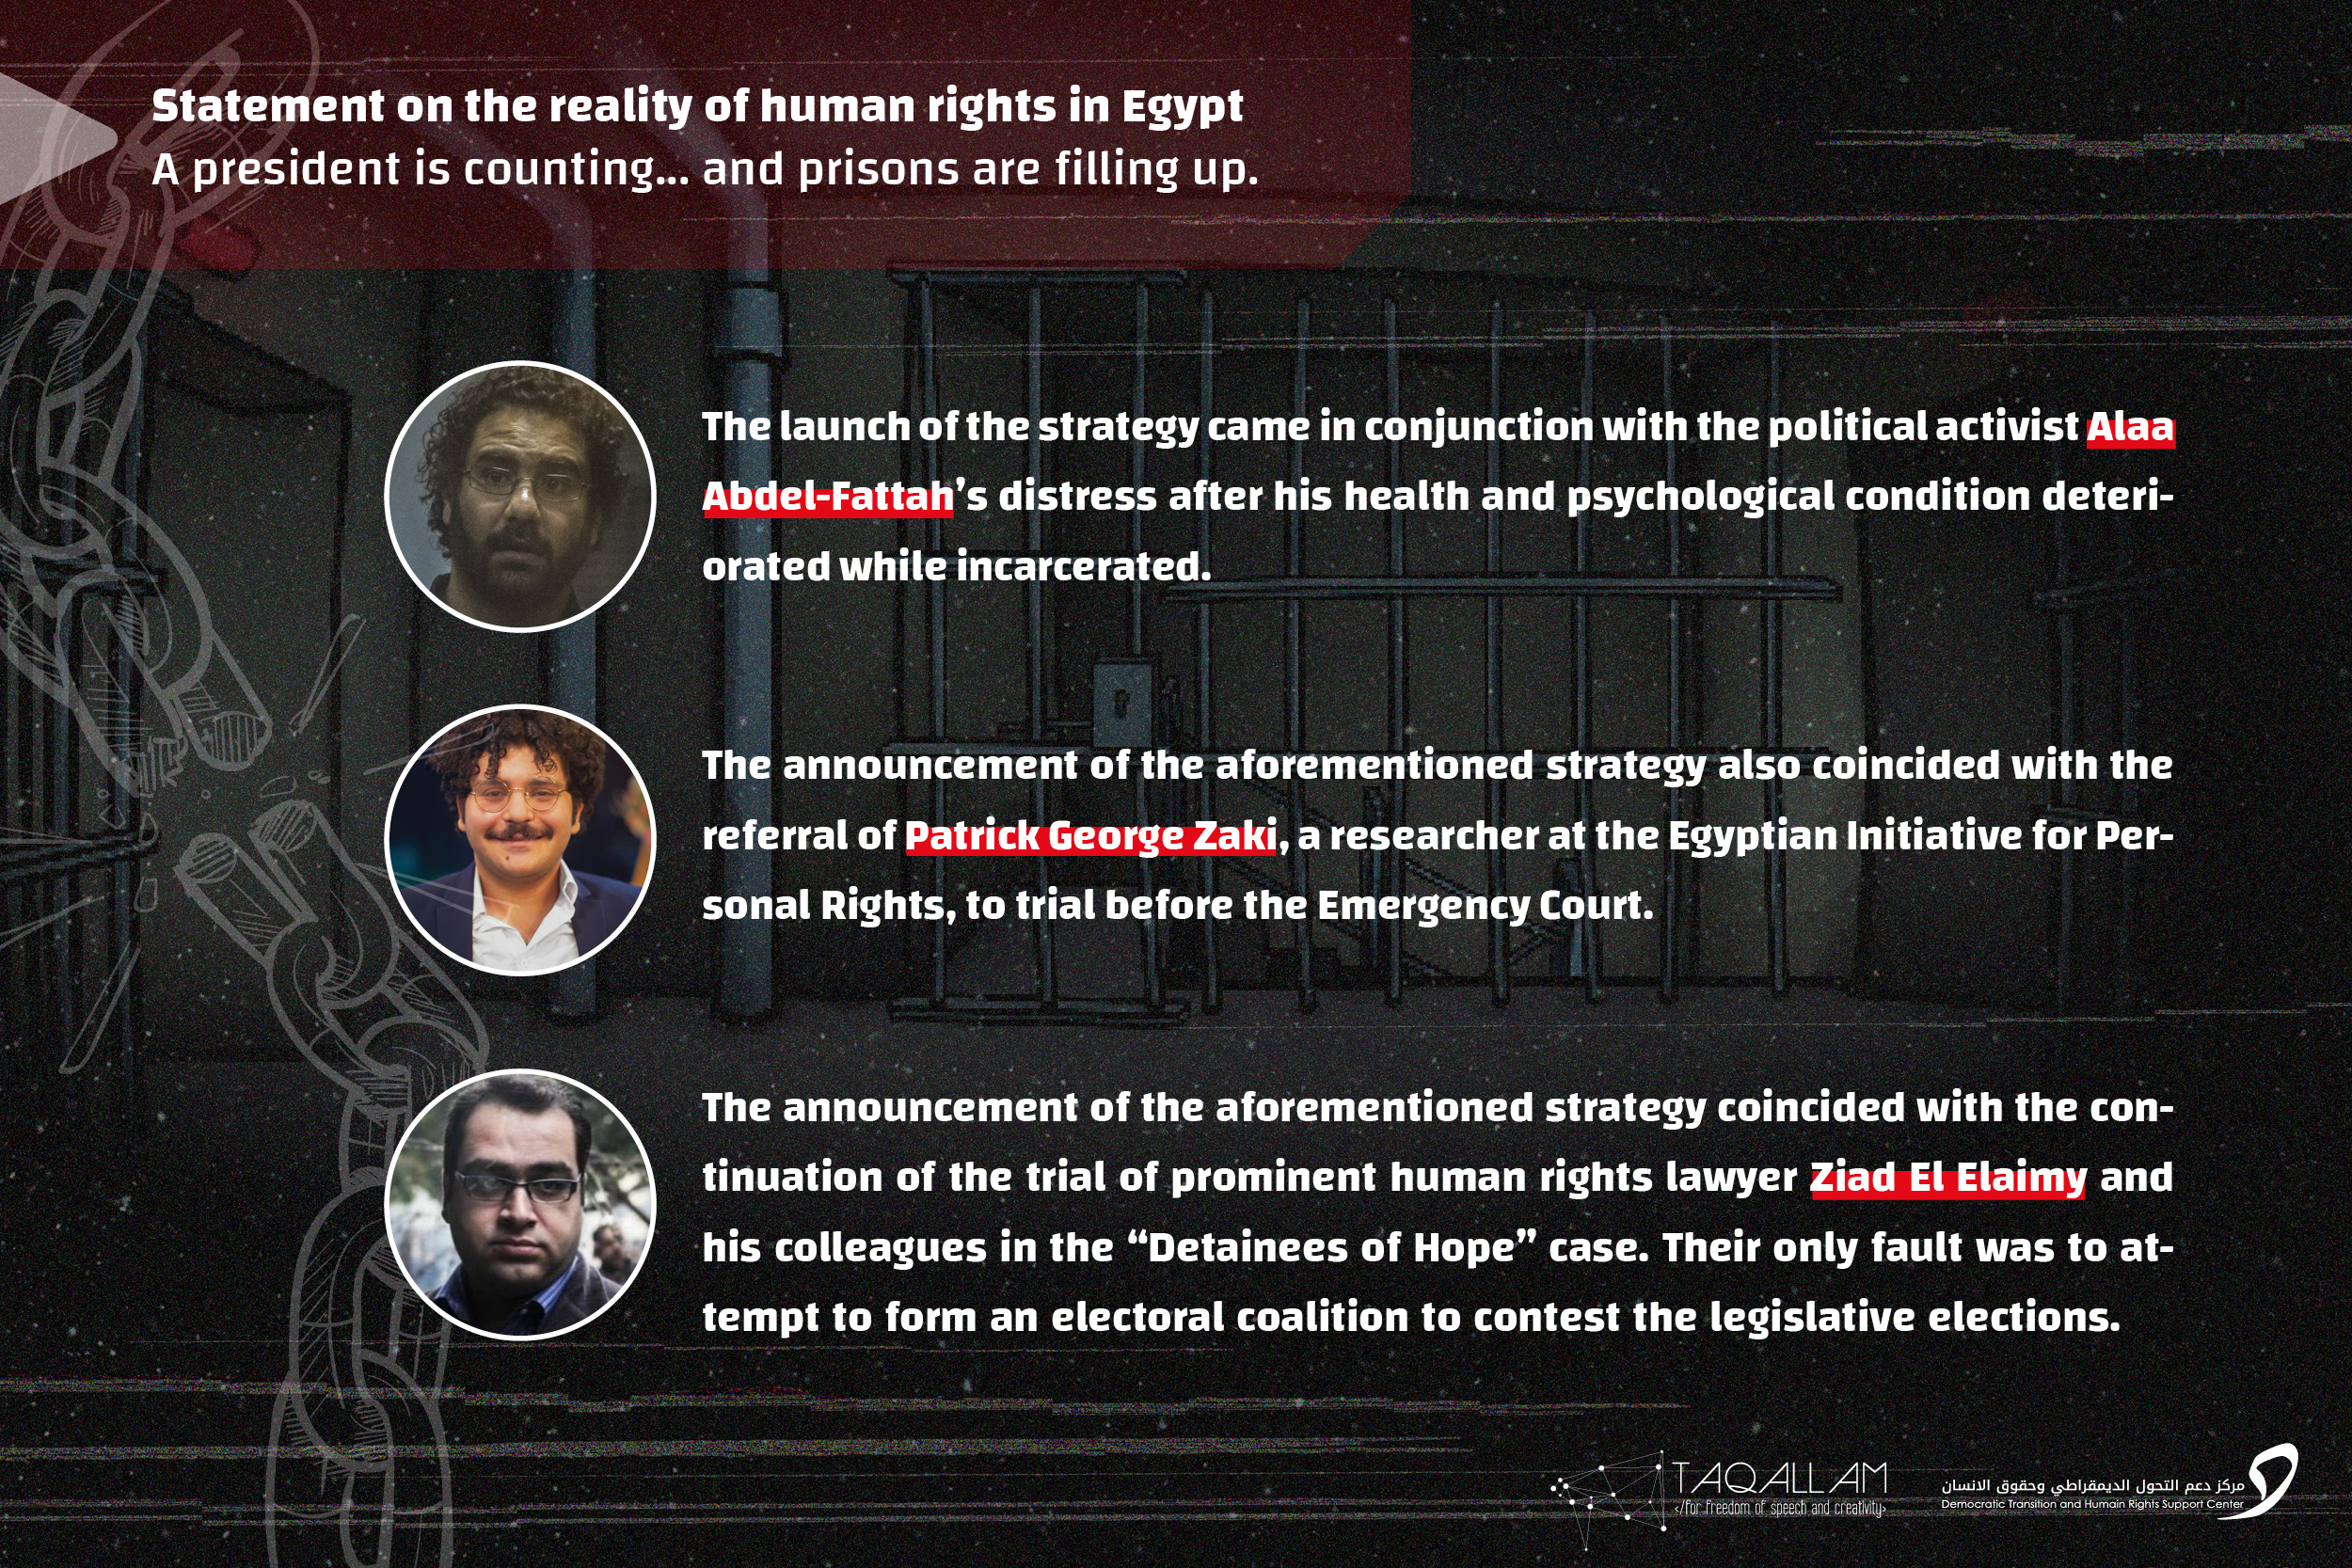 Statement on the reality of human rights in Egypt